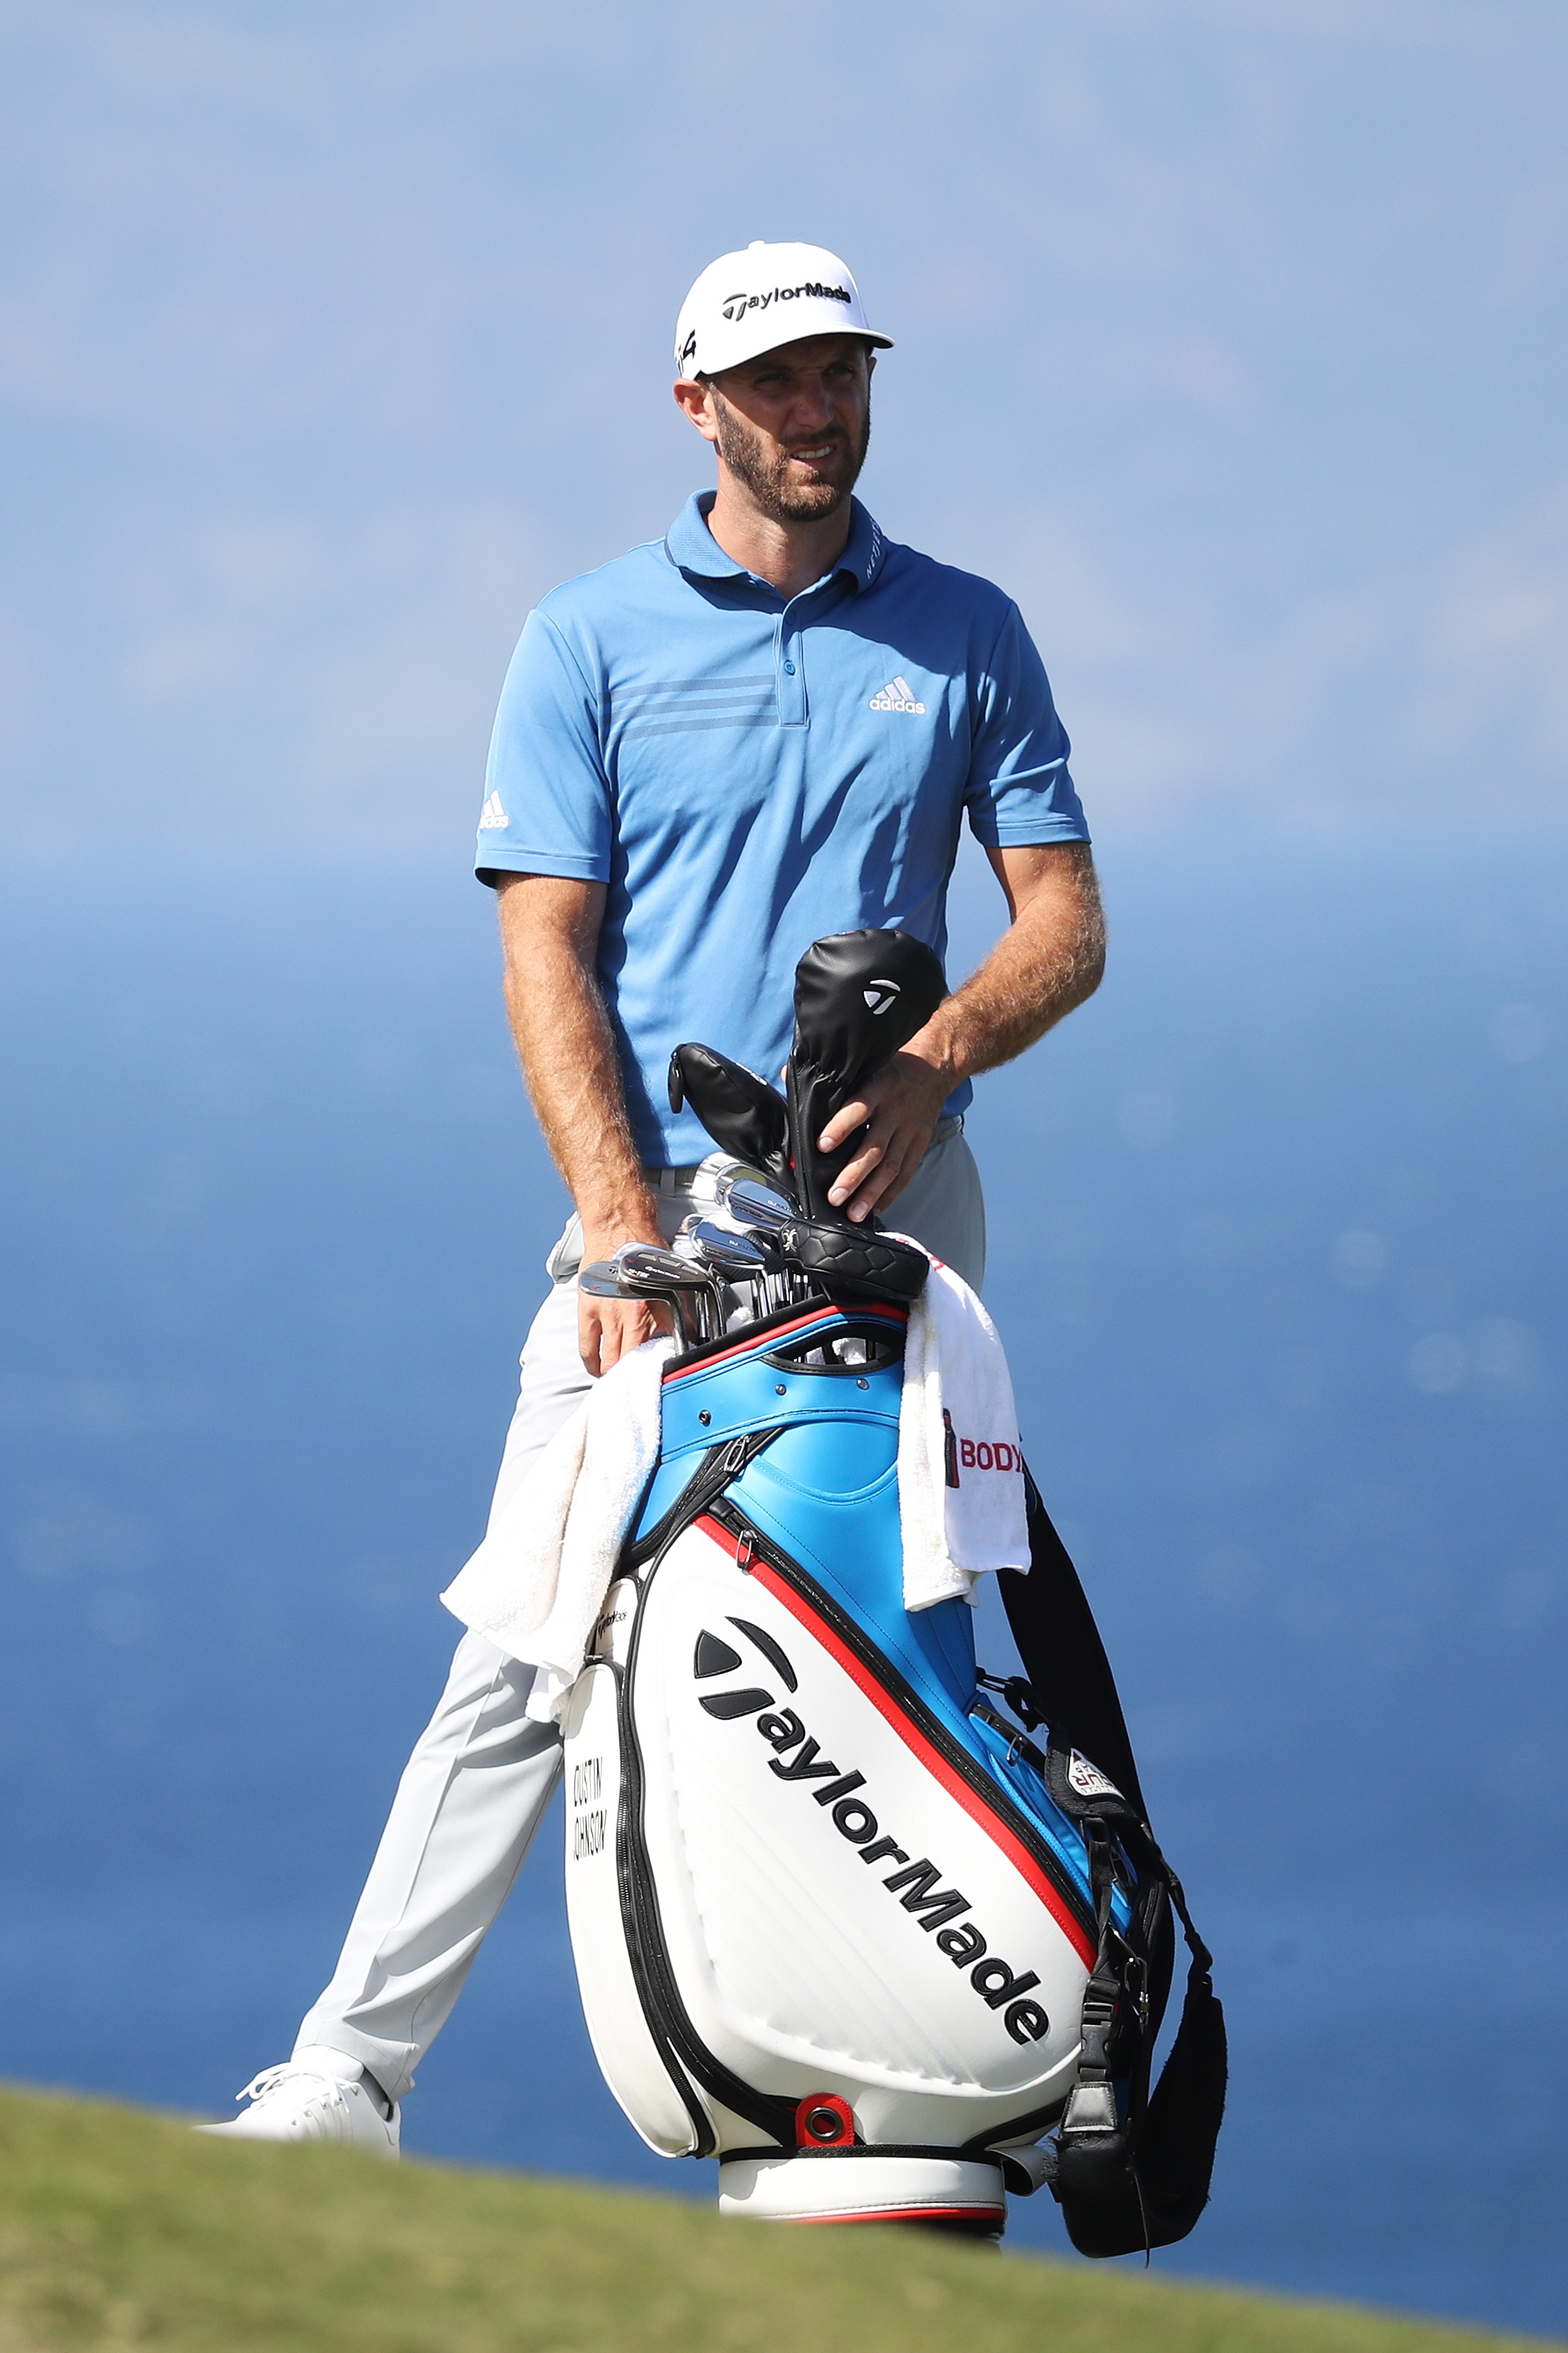 Dustin Johnson wins Tournament of Champions with new TaylorMade M4 driver